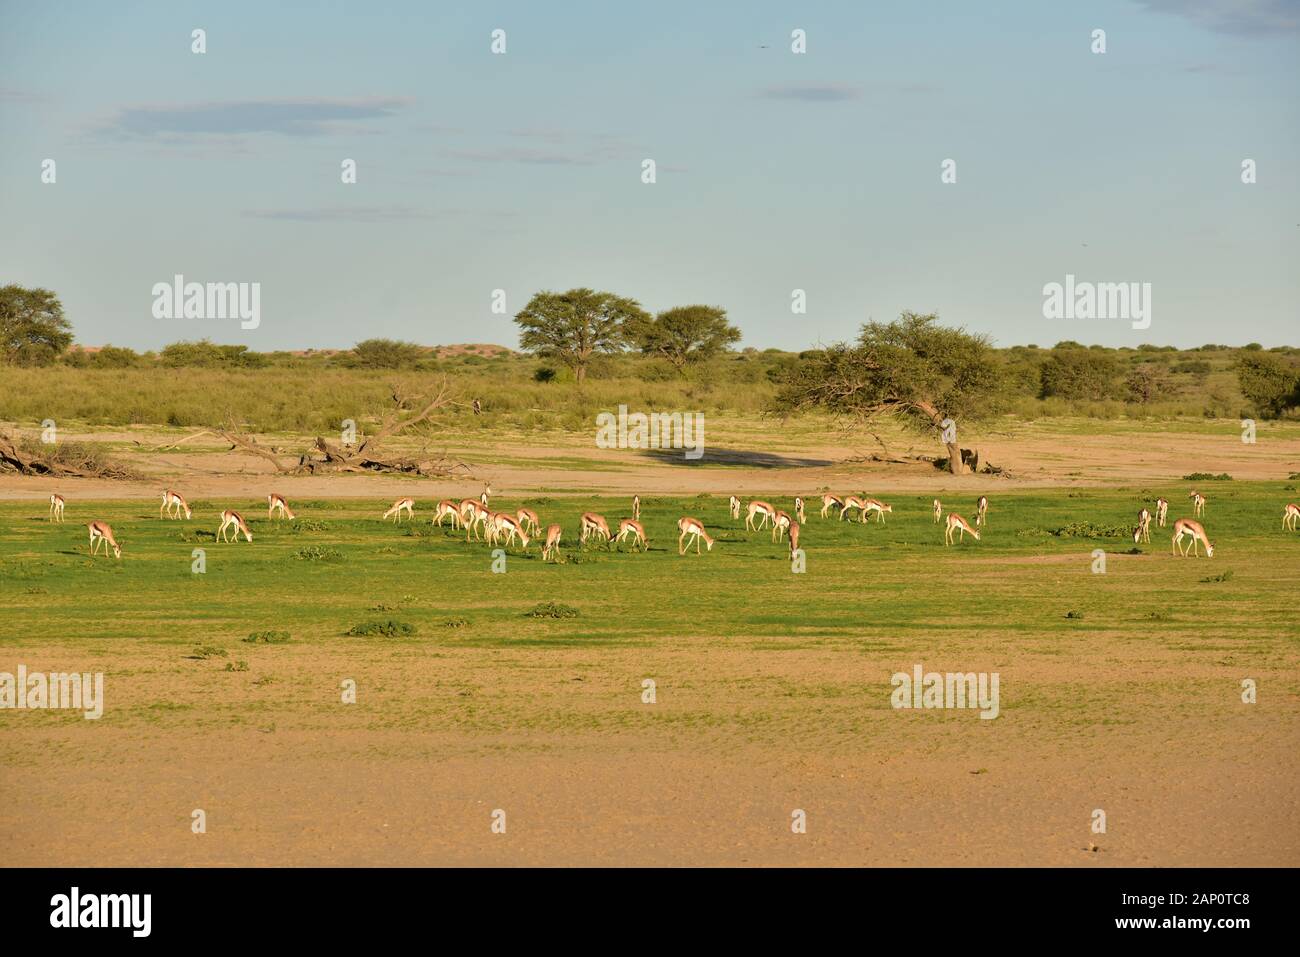 Herd of jumping jumping buck on late afterwithtag in Kgalagadi Transfrontier National Park, taken on February 24th, 2019. The Kgalagadi Transfrontier National Park was created in 1999 by merging the South African Kalahari-Gemsbok National Park and the Gemsbok National Park in Botswana and is a cross-border nature reserve in the Kalahari Desert with an area of around 38,000 square kilometers. The park is particularly known for its lions, which can often be found there, but also for numerous other wild animals that live here. Photo: Matthias Toedt / dpa-Zentralbild / ZB / Picture Alliance | usag Stock Photo